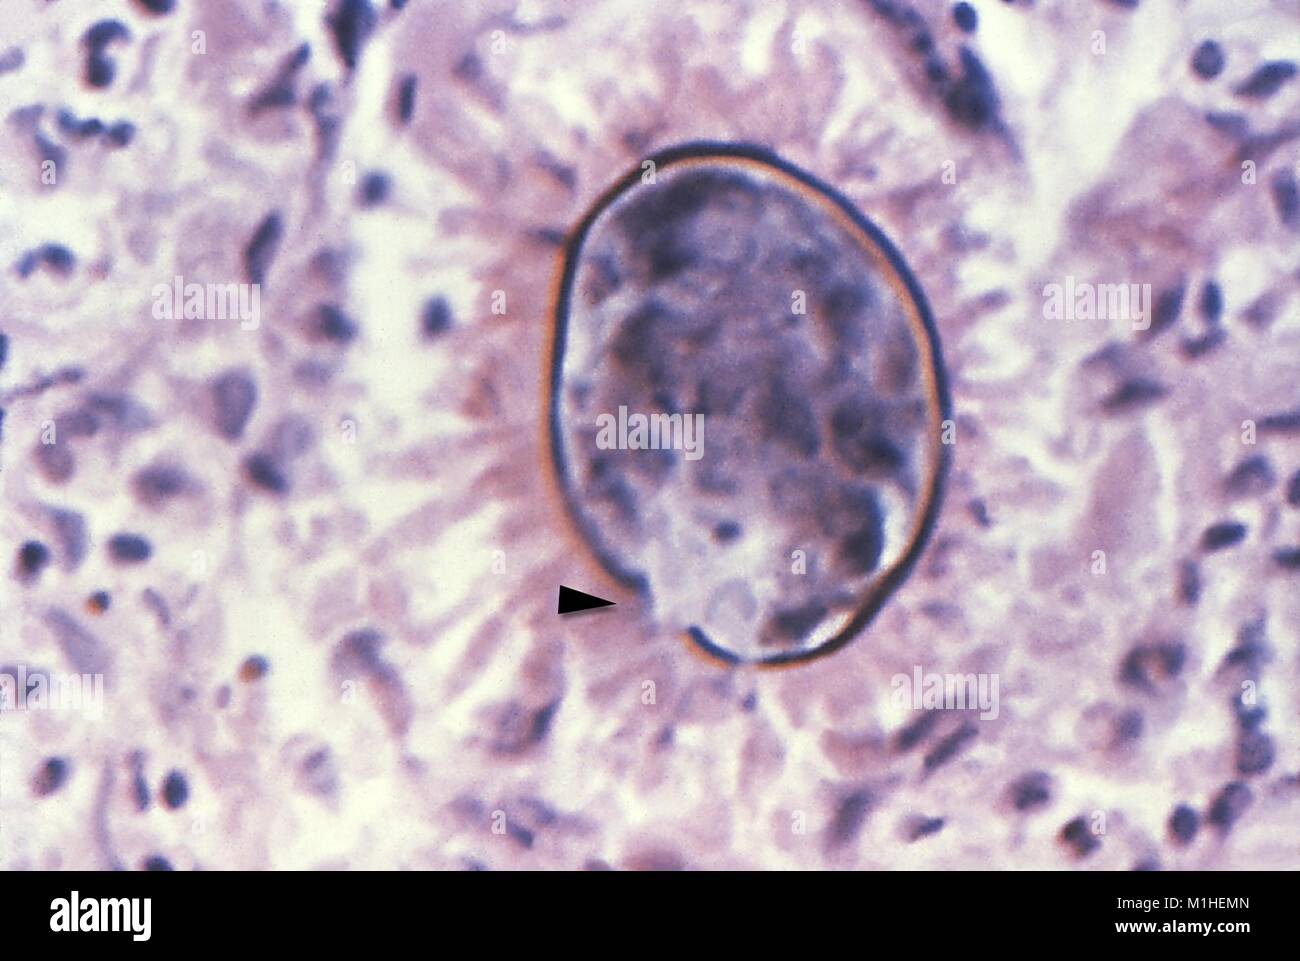 Schistosoma japonicum egg vestigial spine revealed in the micrograph film, taken from a liver tissue biopsy, 1986. Image courtesy Centers for Disease Control (CDC). () Stock Photo